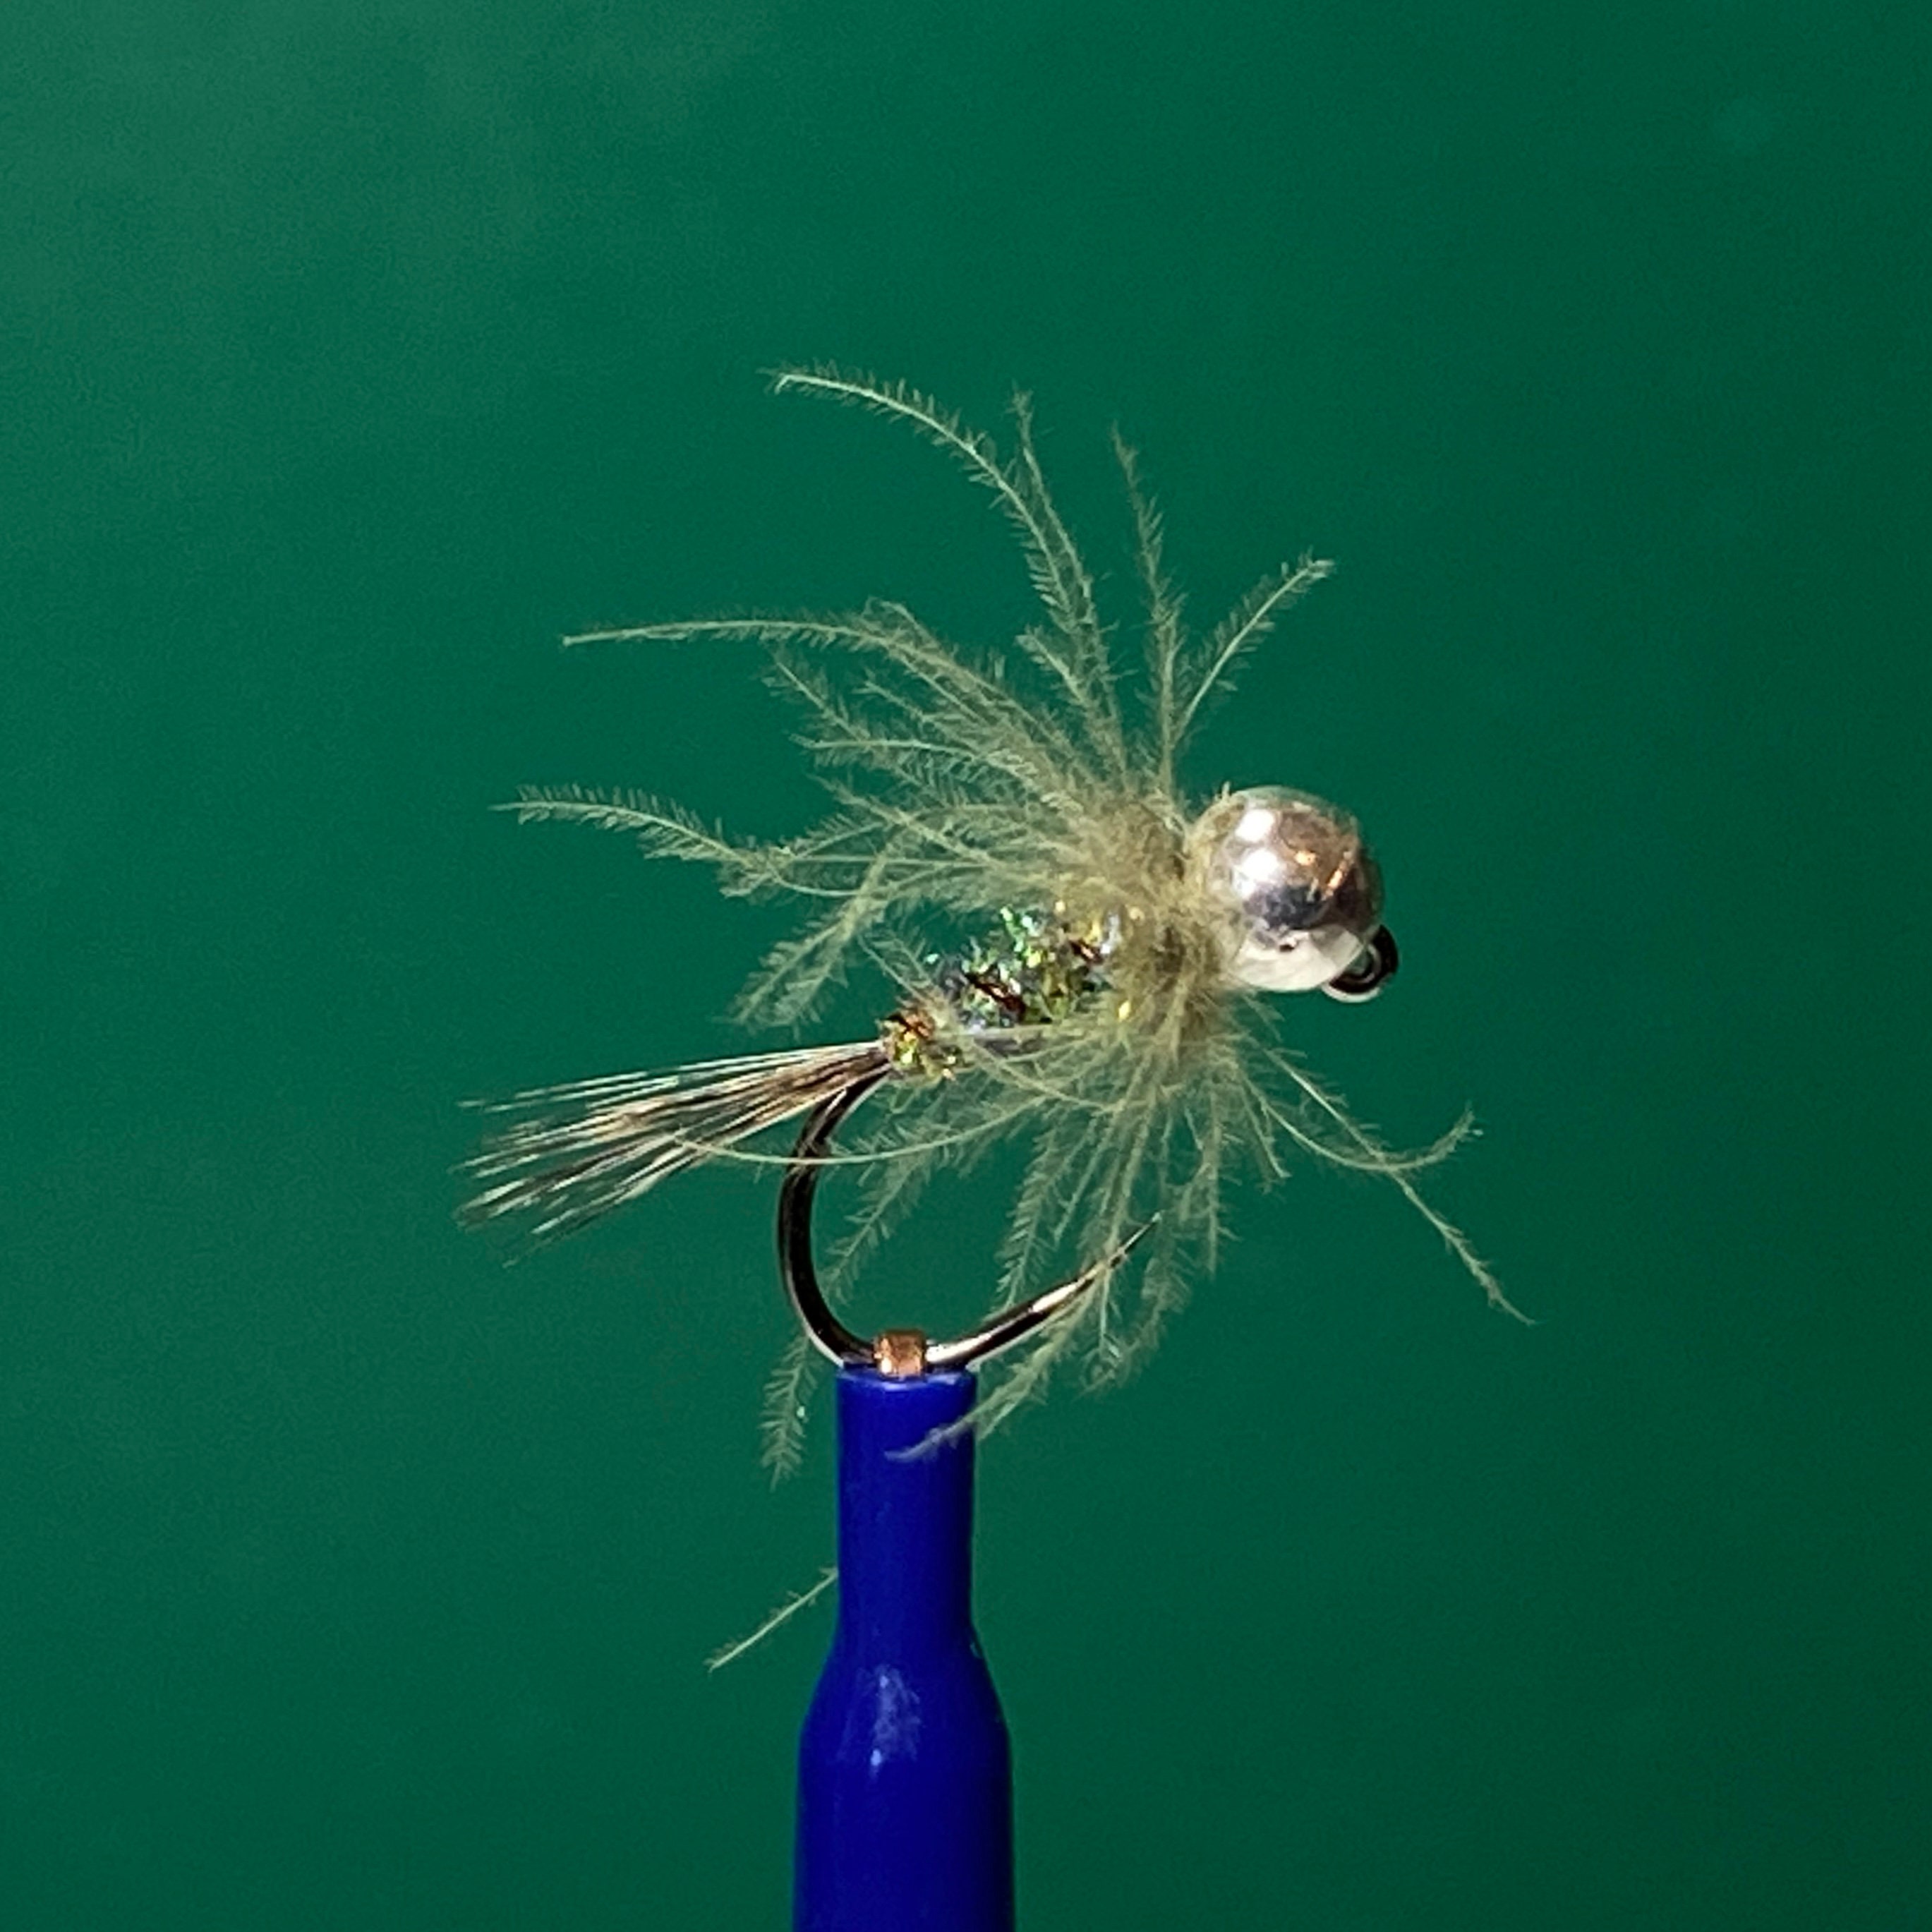 Duracell Jig. One of the BEST Fly Fishing Flies. Great Euro Nymph 